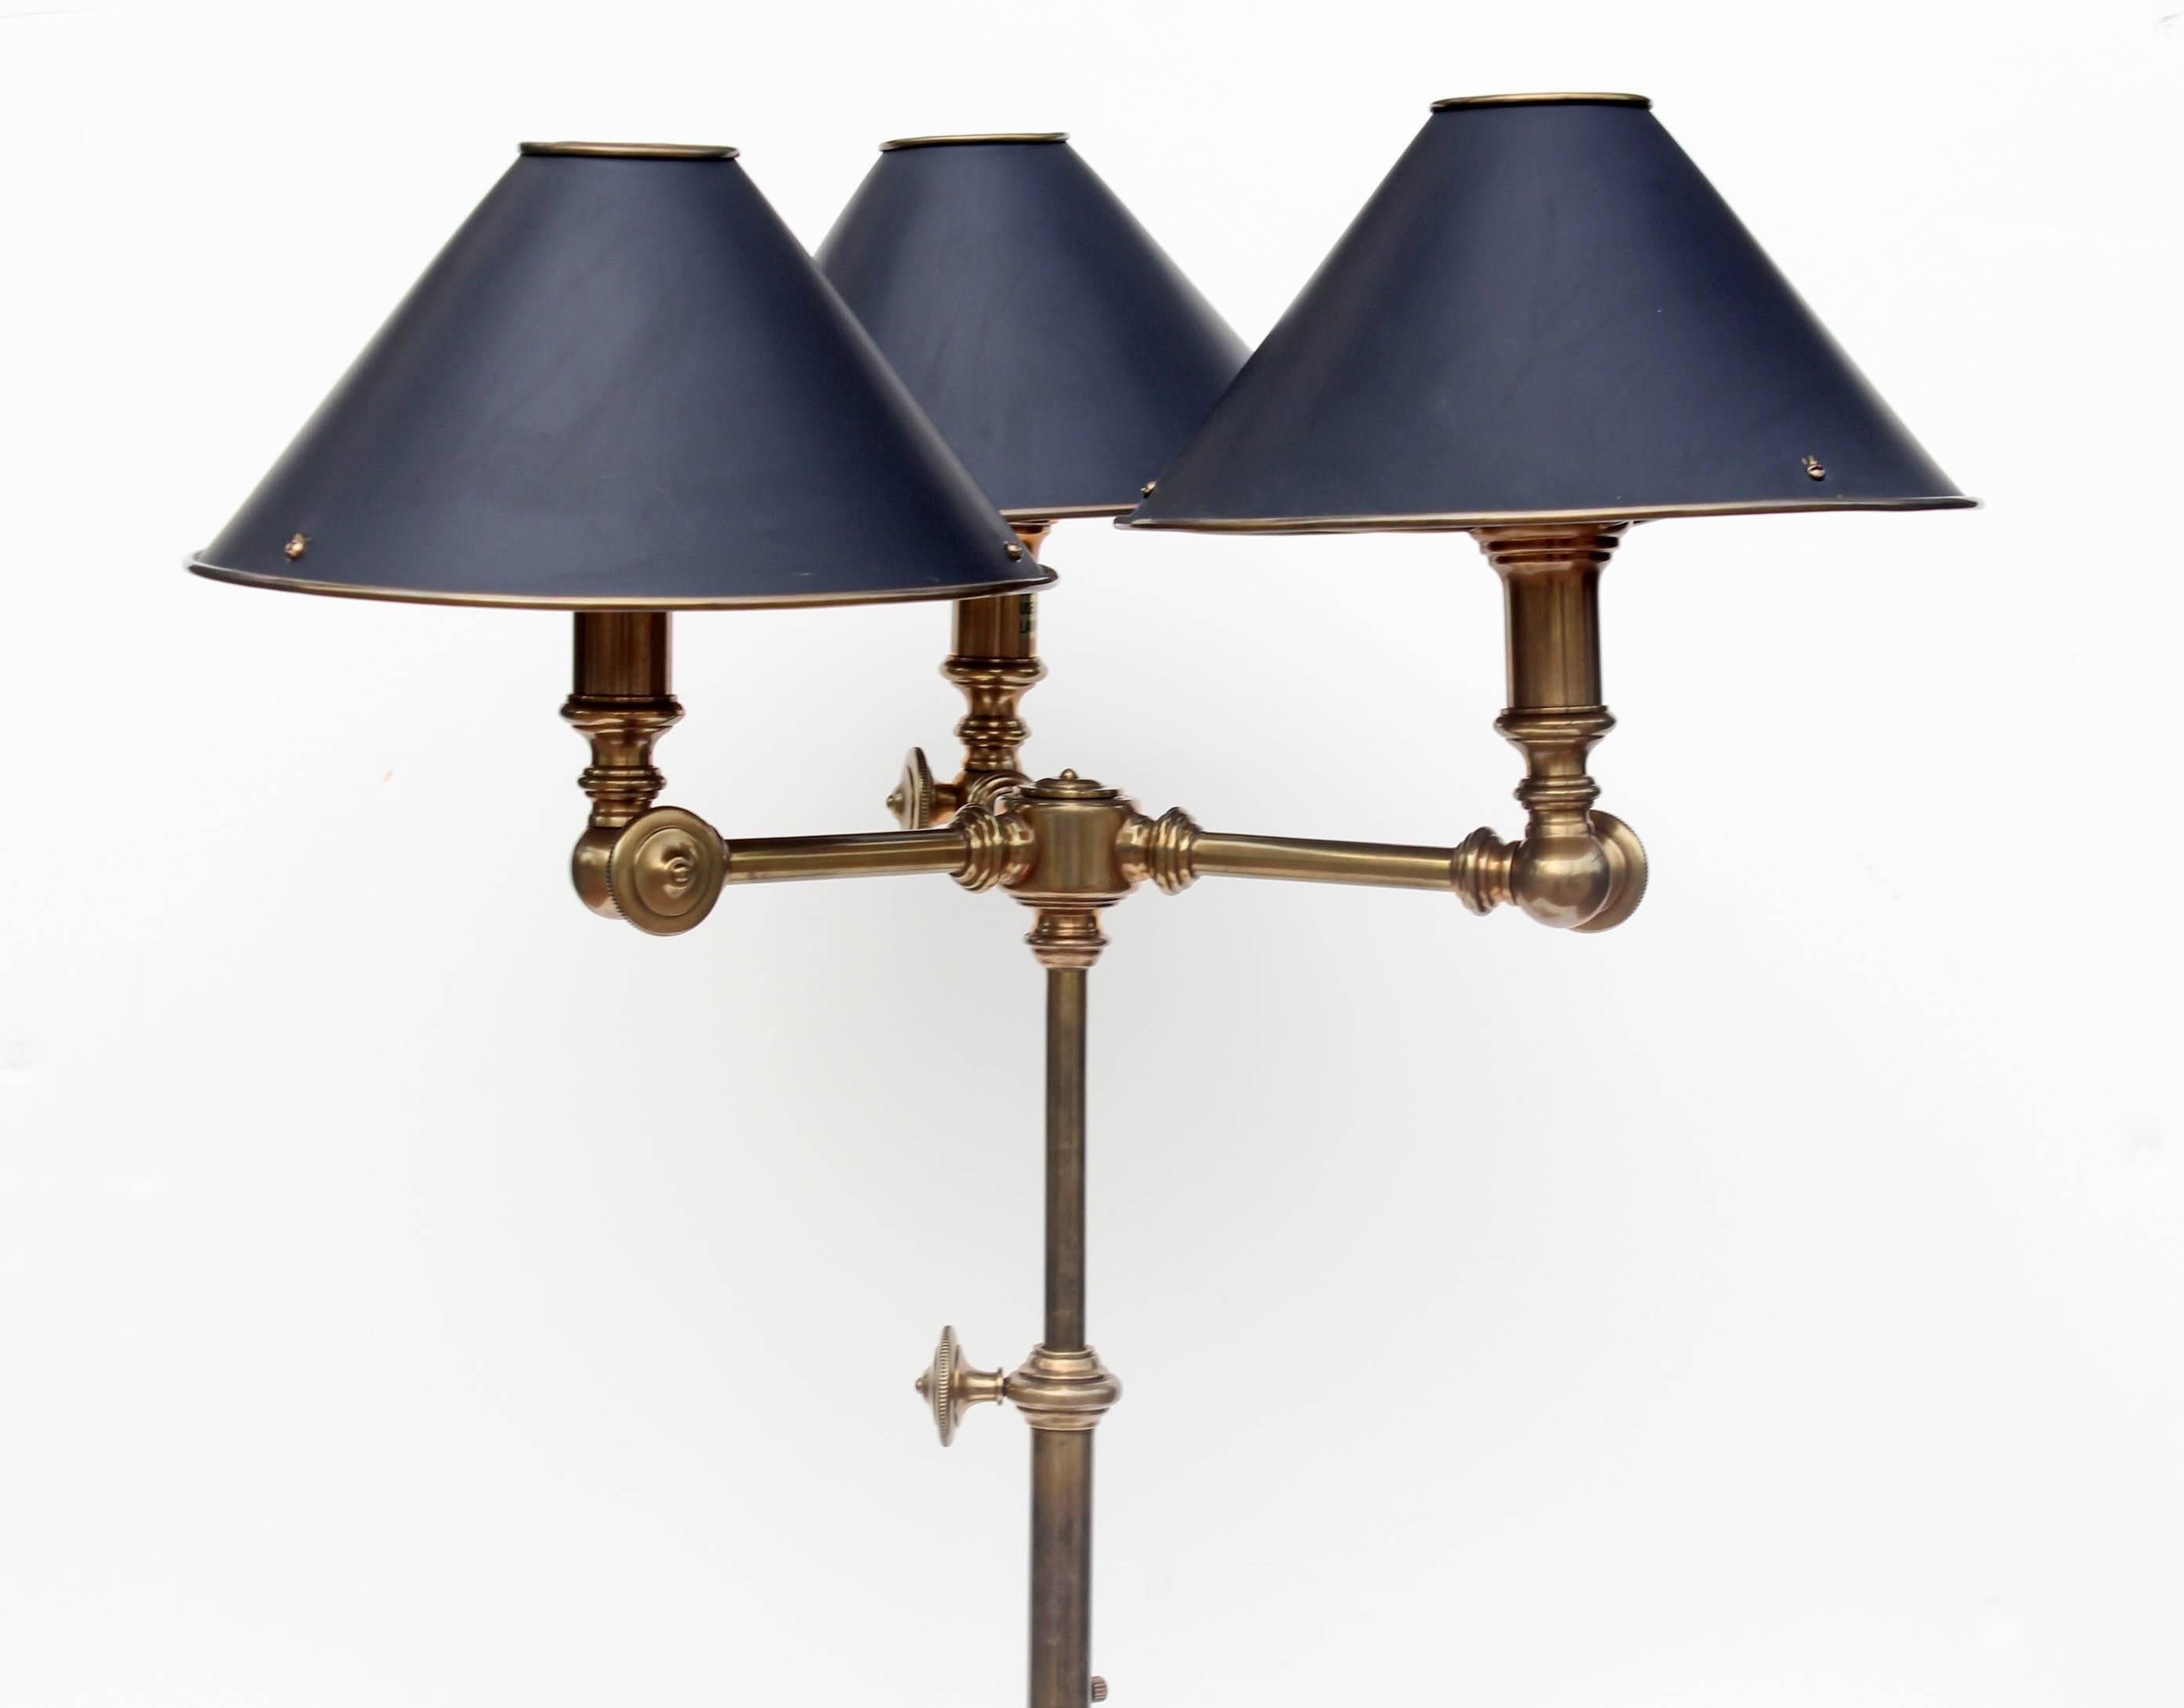 Pair of Chapman manufacturer adjustable brass lamps. In the style of the old gaslight fixtures. Shades are adjustable and also made of brass.